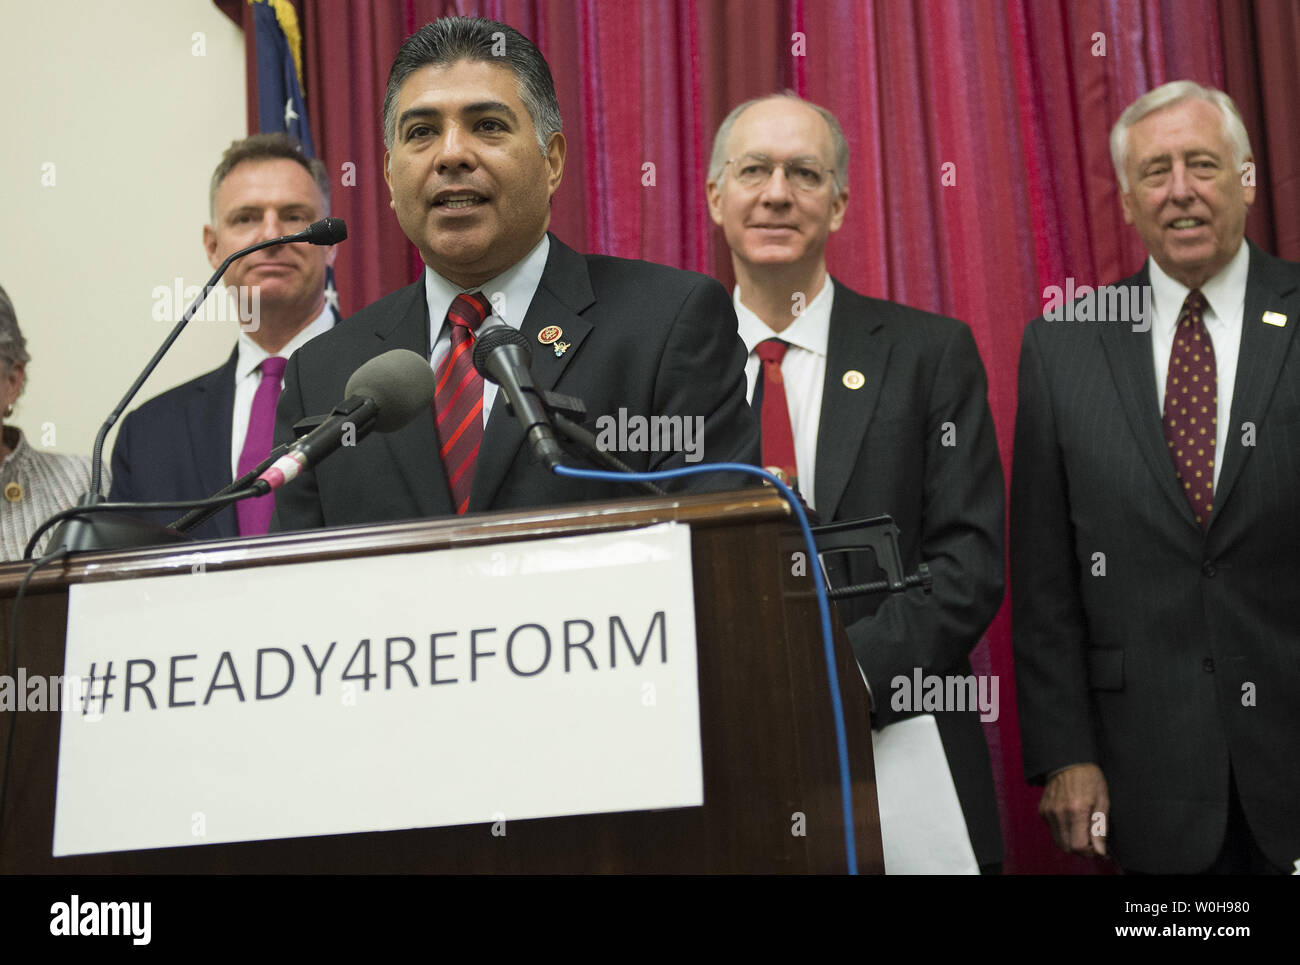 Rep. Tony Cardenas (D-CA) speaks at a press conference on immigration reform as he is joined by freshmen members of the House of Representatives, on Capitol Hill in Washington, D.C., November 13, 2013. UPI/Kevin Dietsch Stock Photo